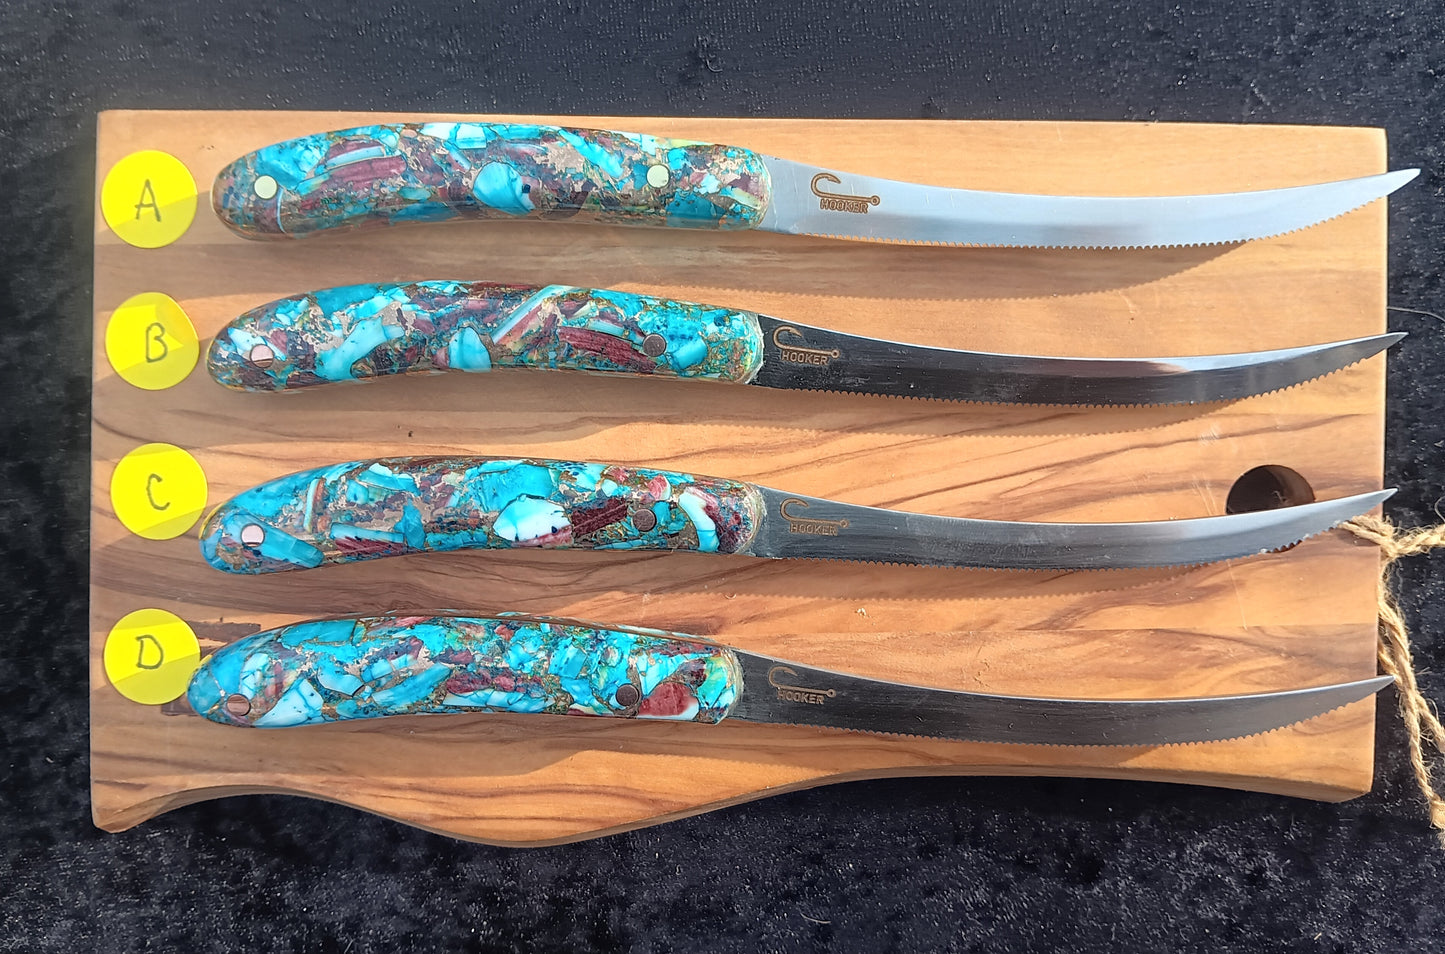 Turquoise, Bronze, and Oyster Shell Composite Handle Knife with Serrated Blade